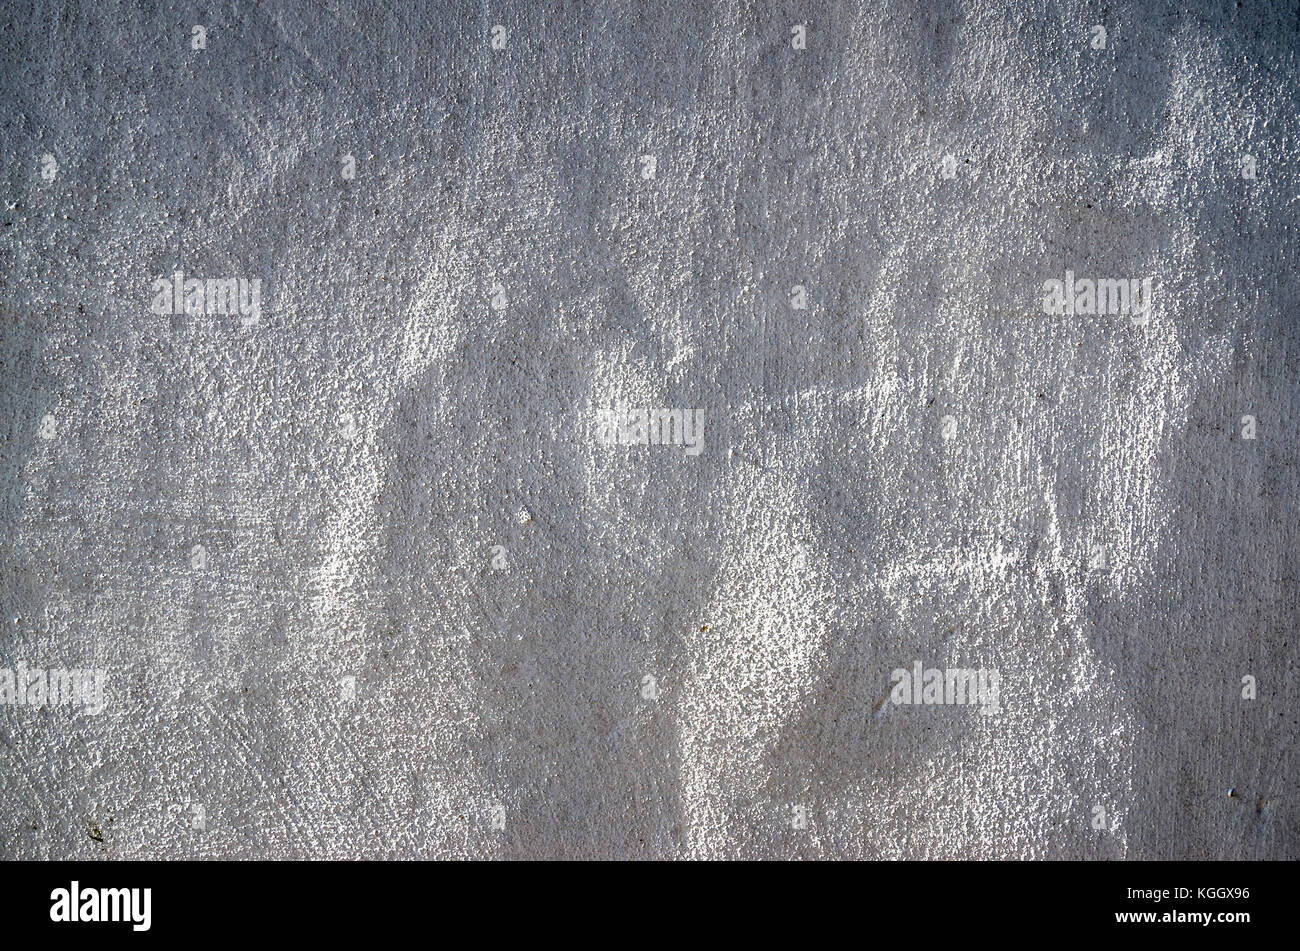 Abstract background formed by sunlight glancing across a rough cast plaster coat on an old barn wall Stock Photo